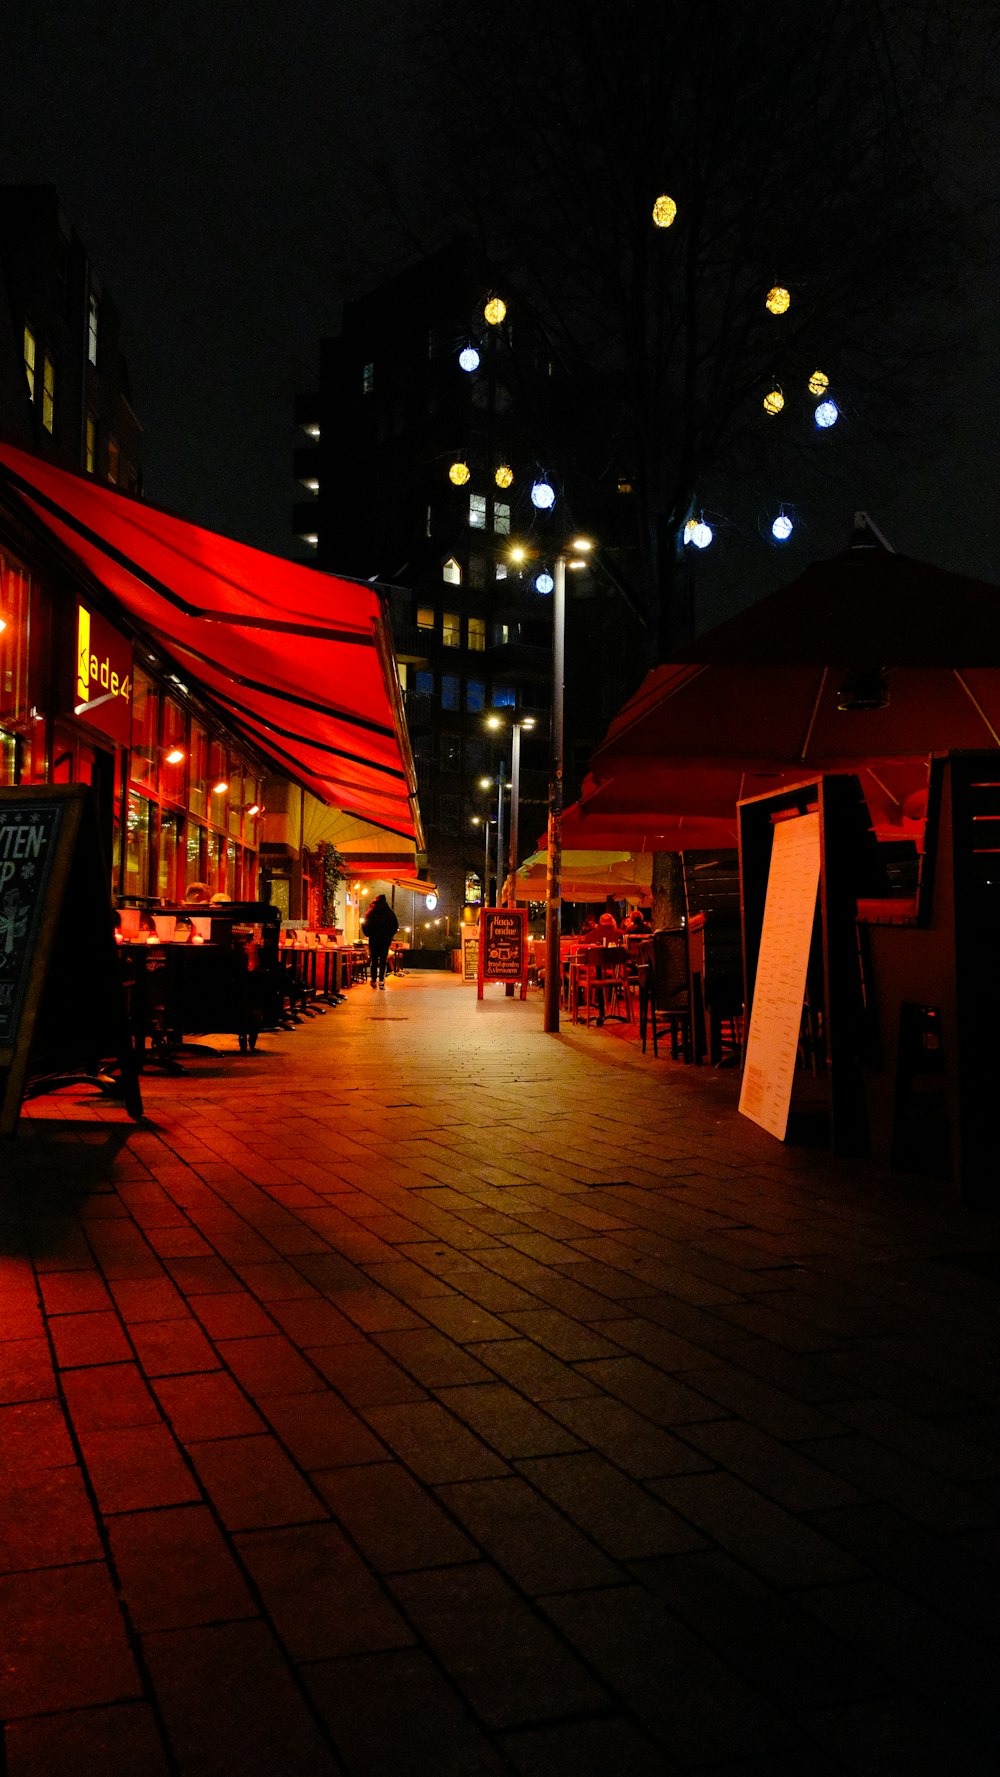 a city street at night with a red awning